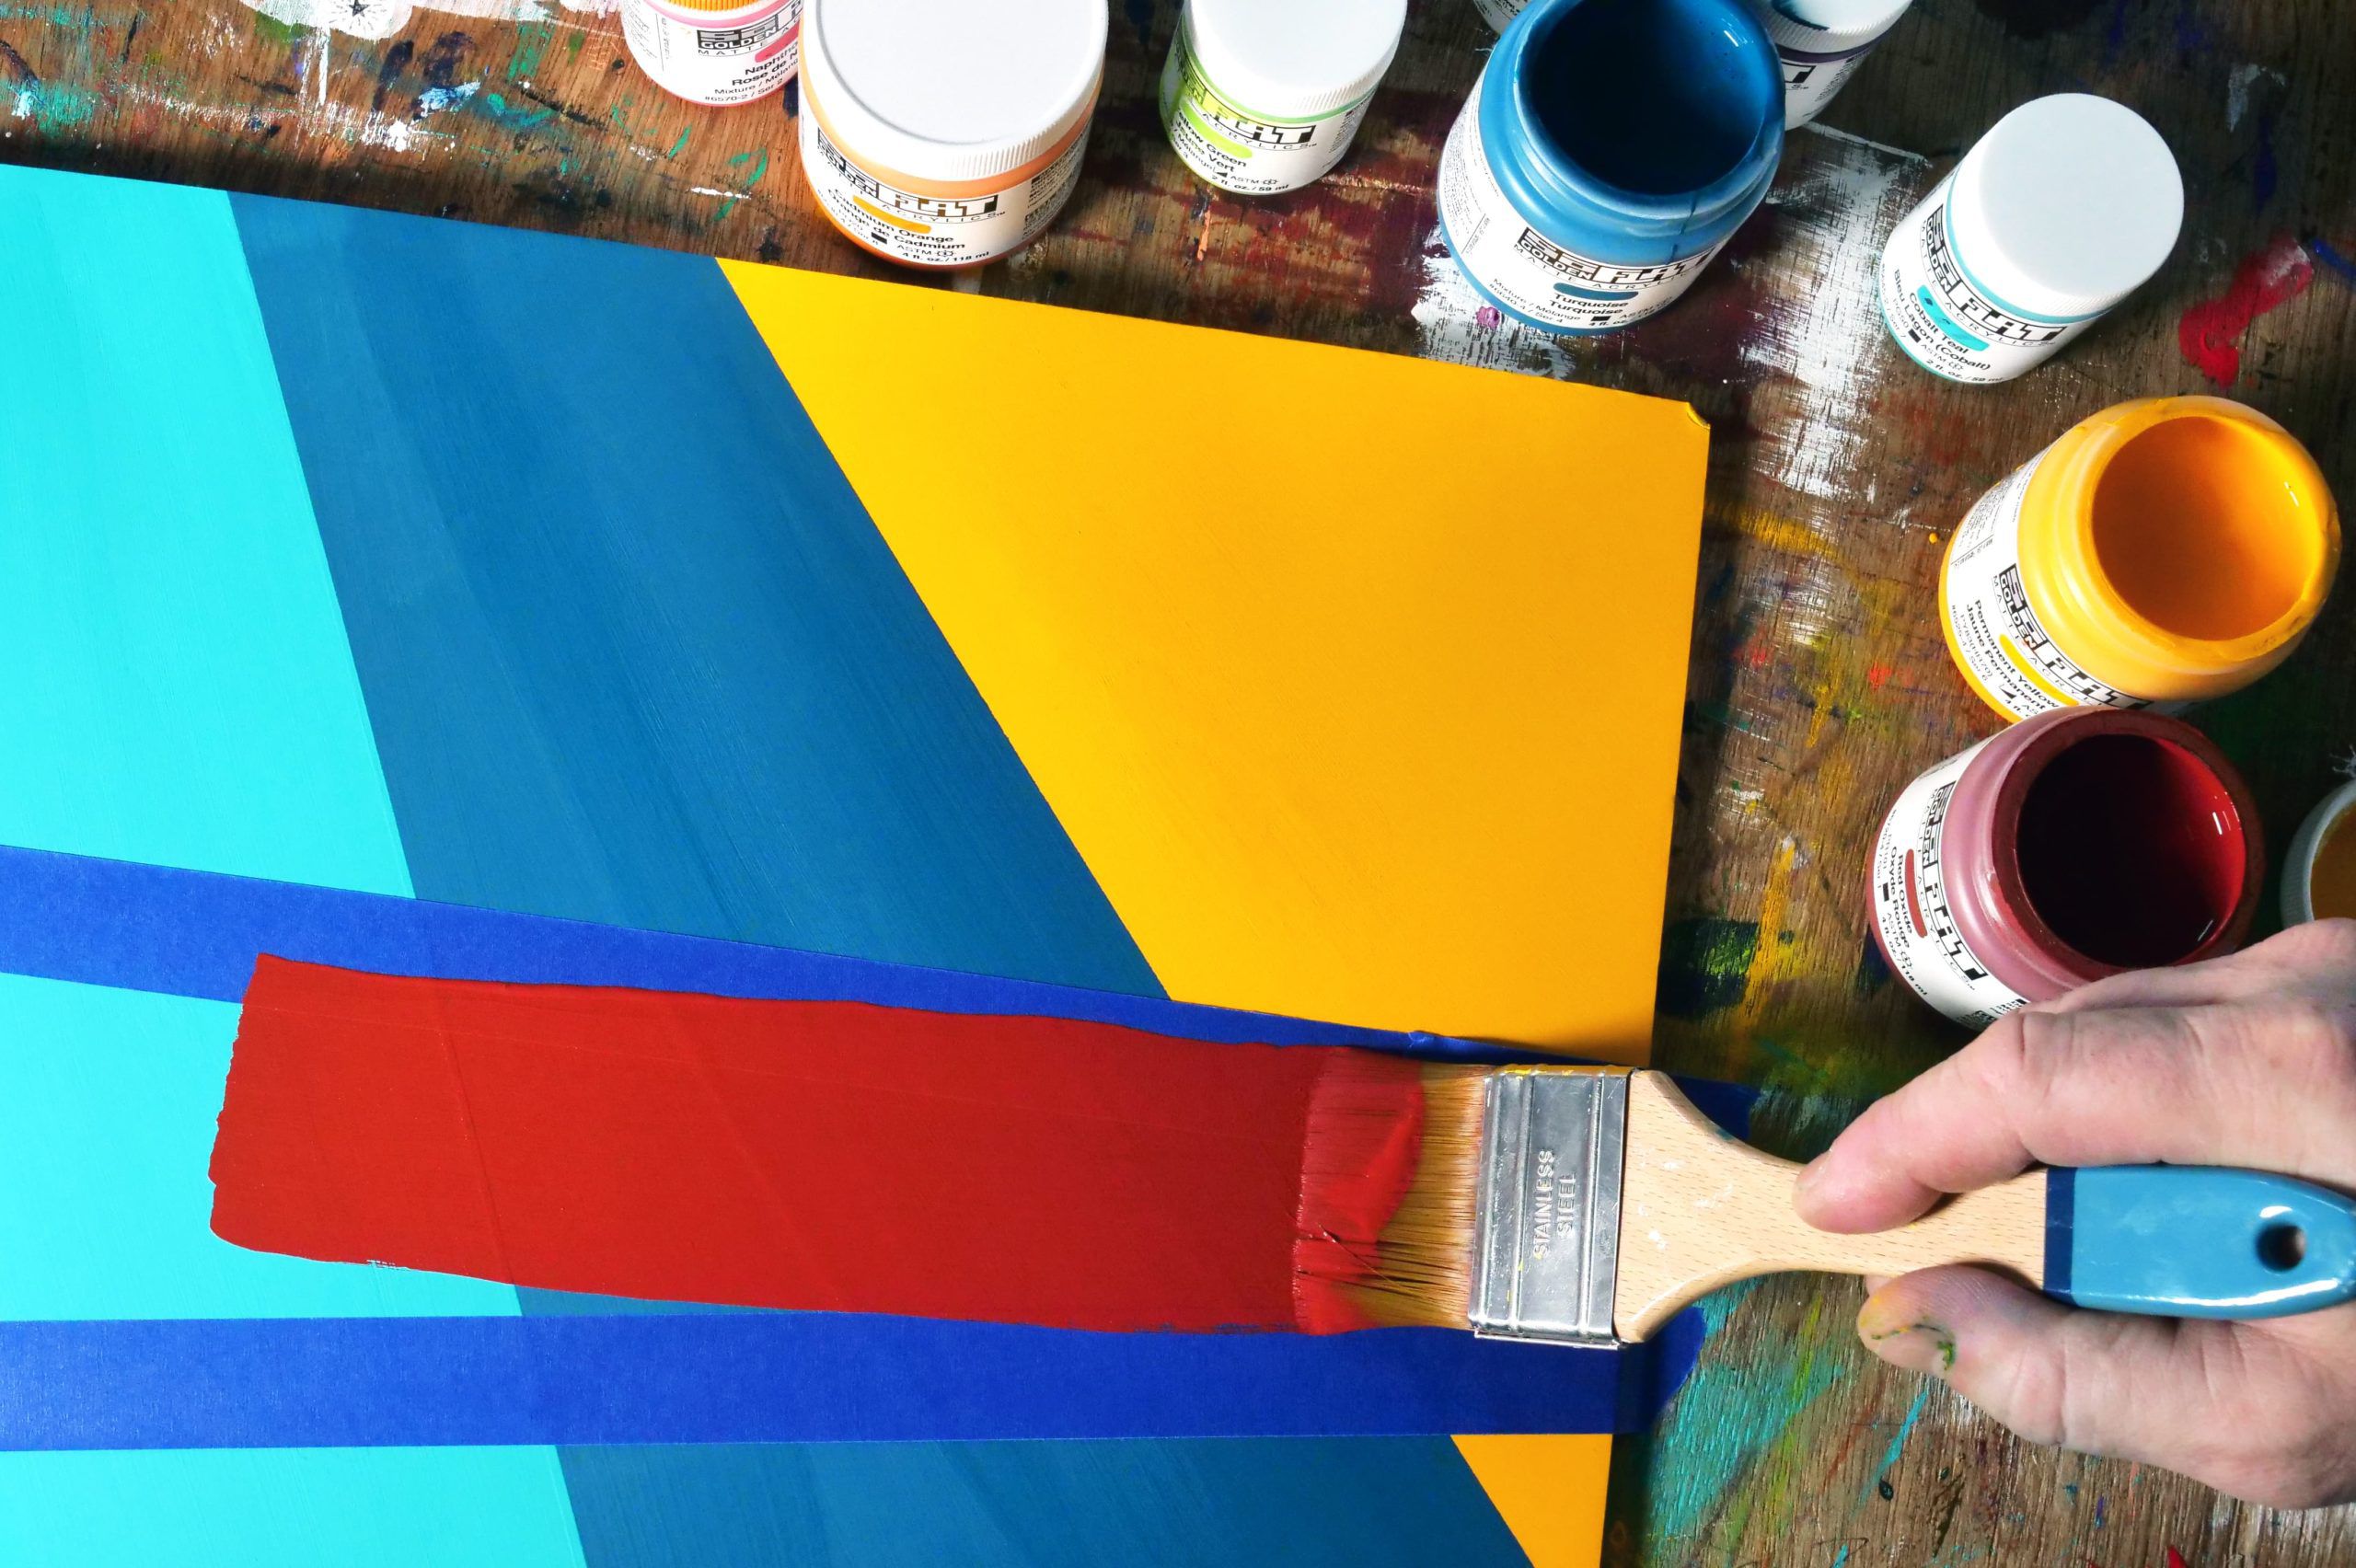 This acrylic paint buying guide will keep you from making costly mistakes